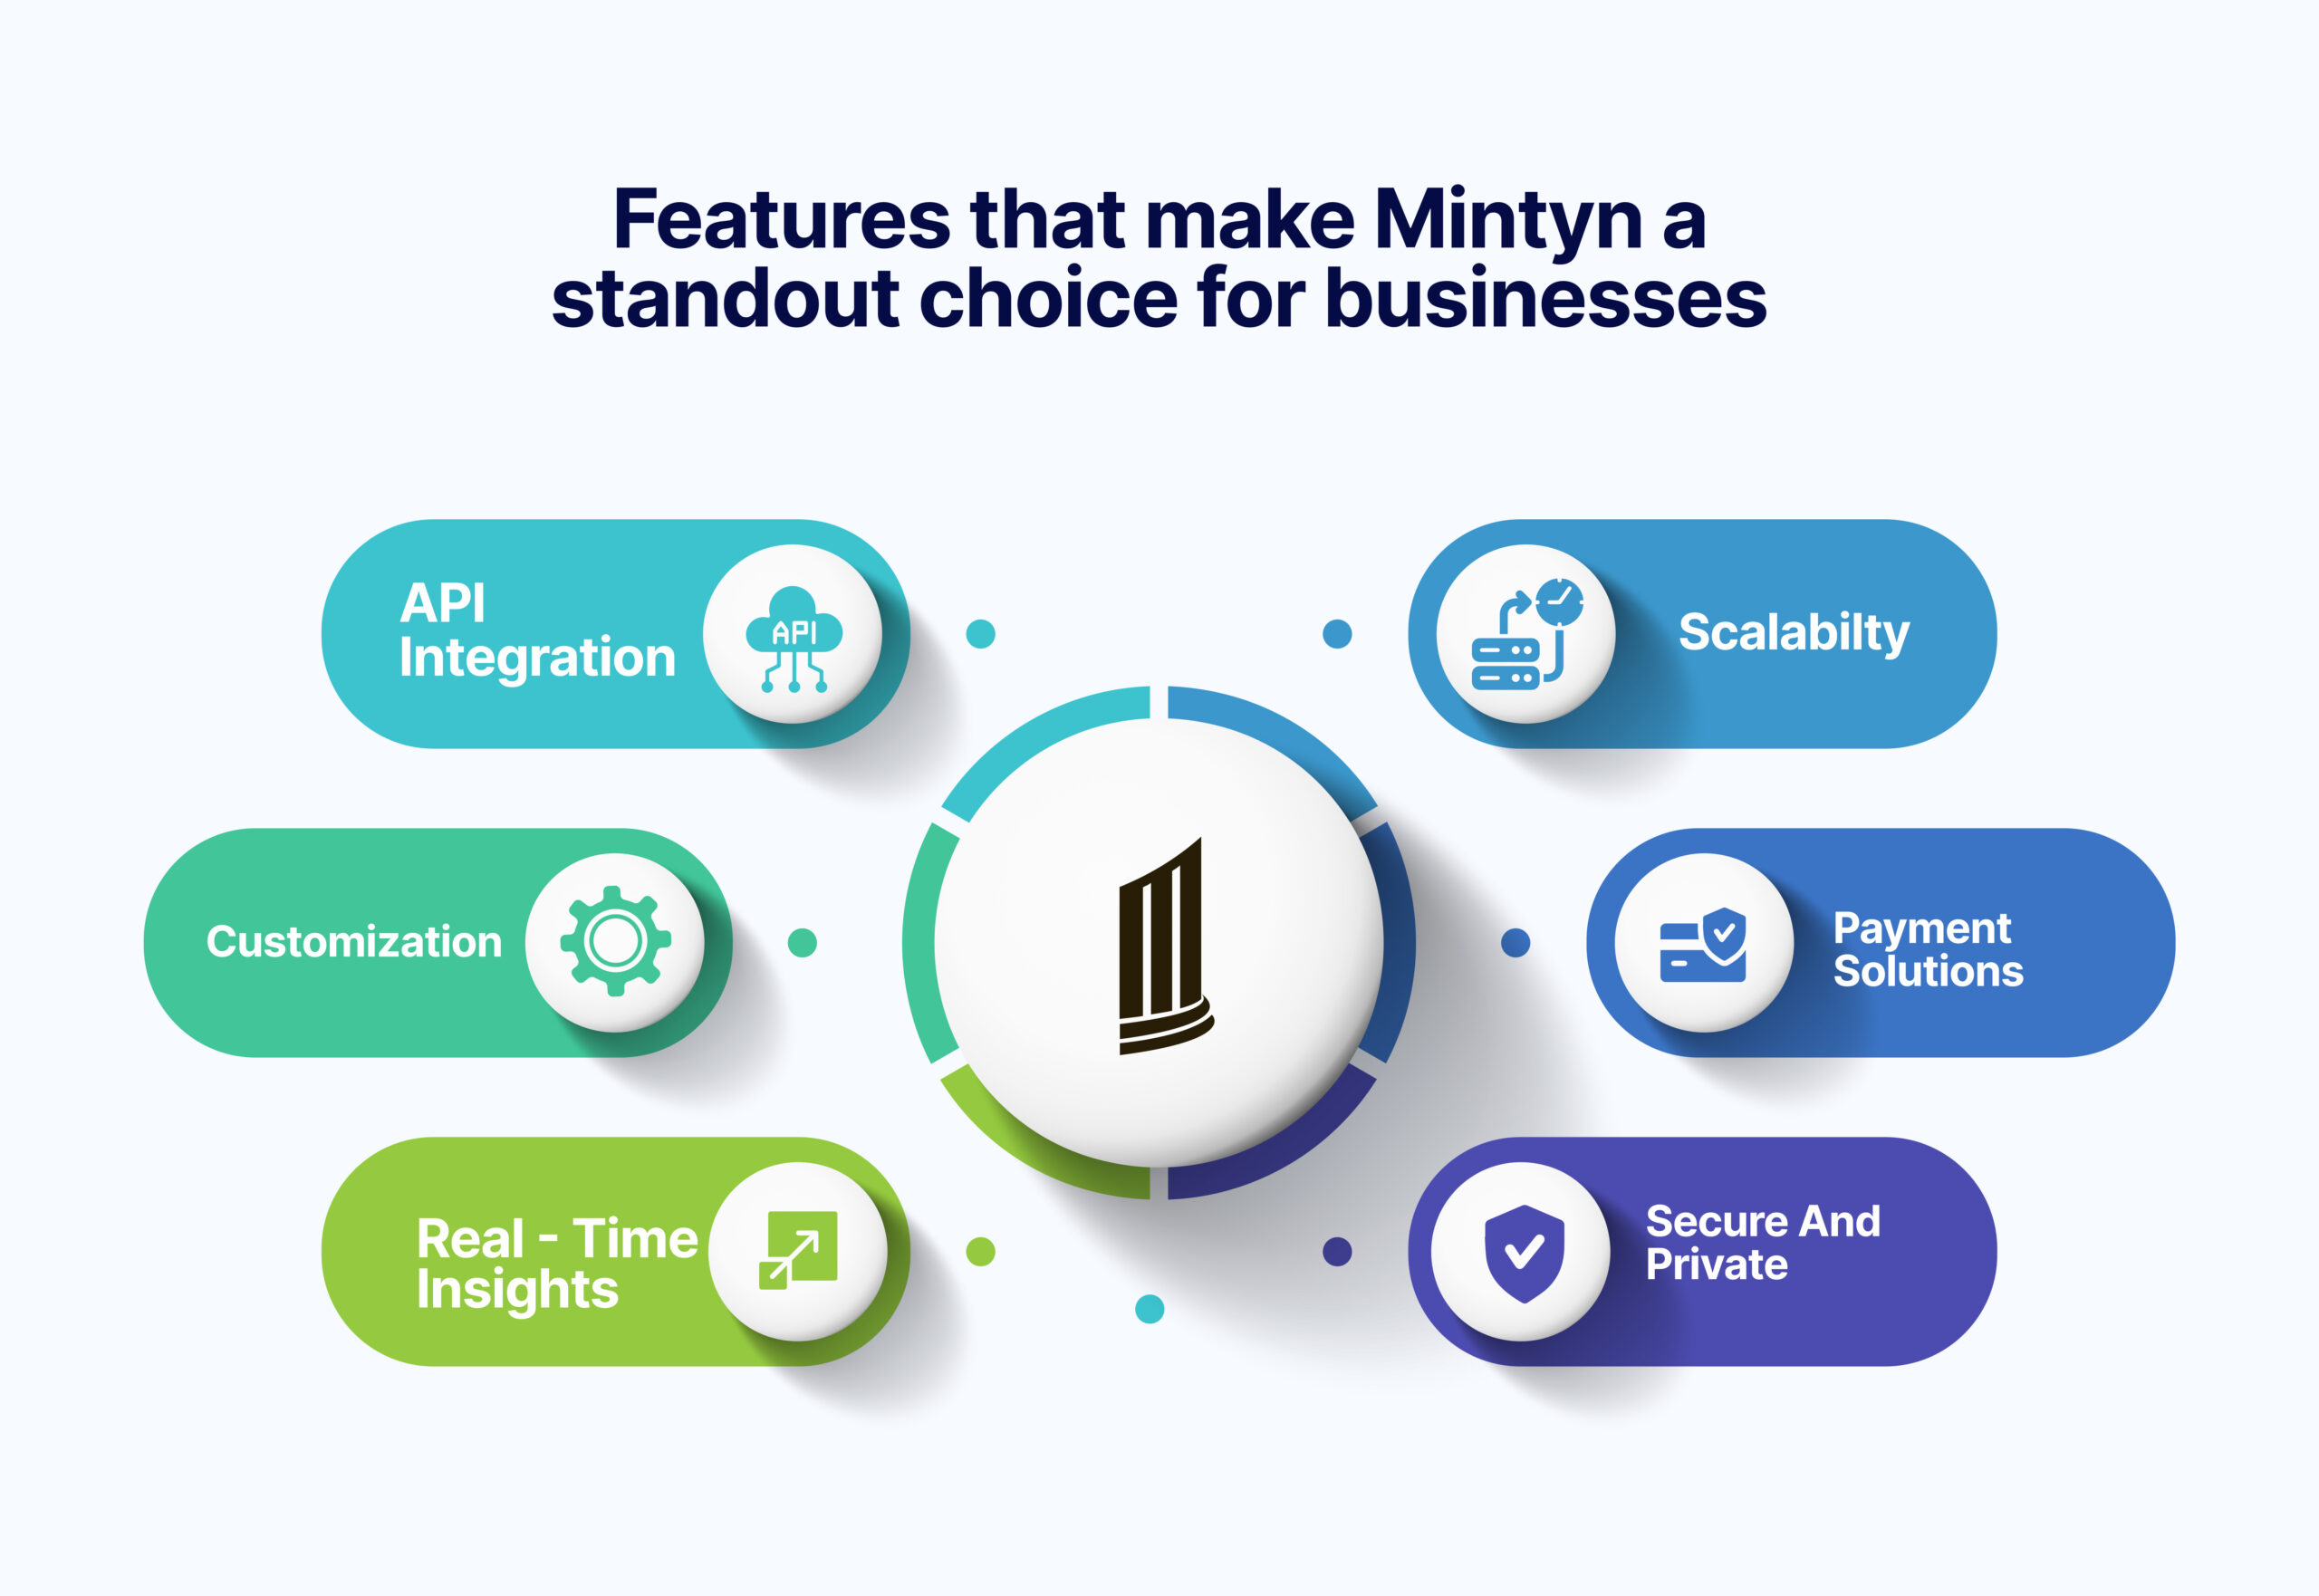 Features that make Mintyn a standout choice for businesses. Banking as a Service